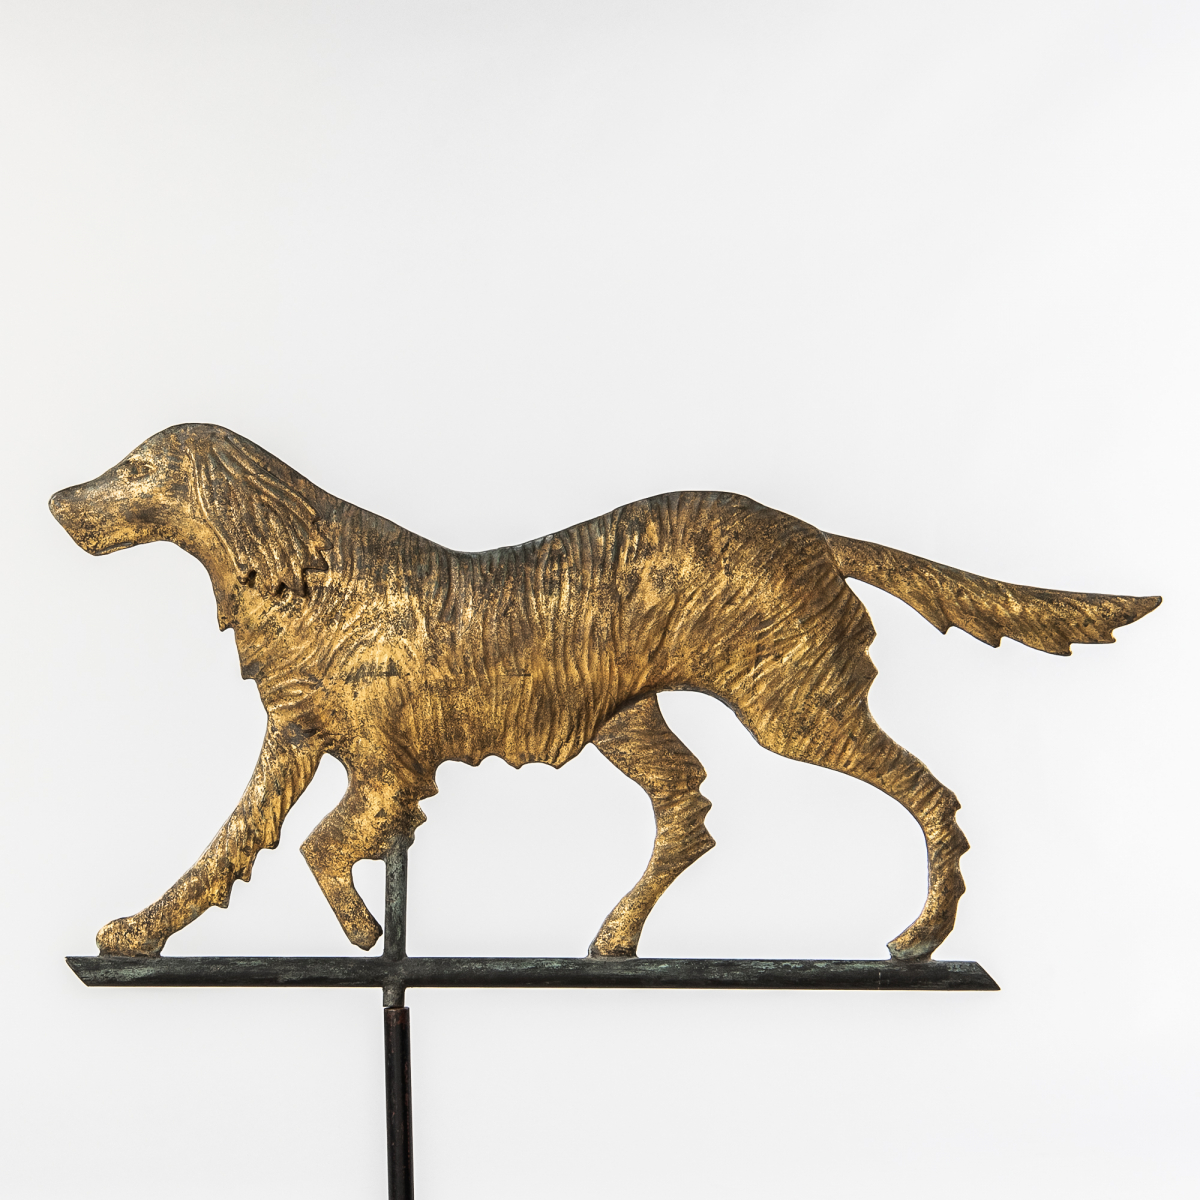 Molded and Gilded Sheet Copper Dog Weathervane, probably Cushing and White, Waltham, Massachusetts, late 19th century